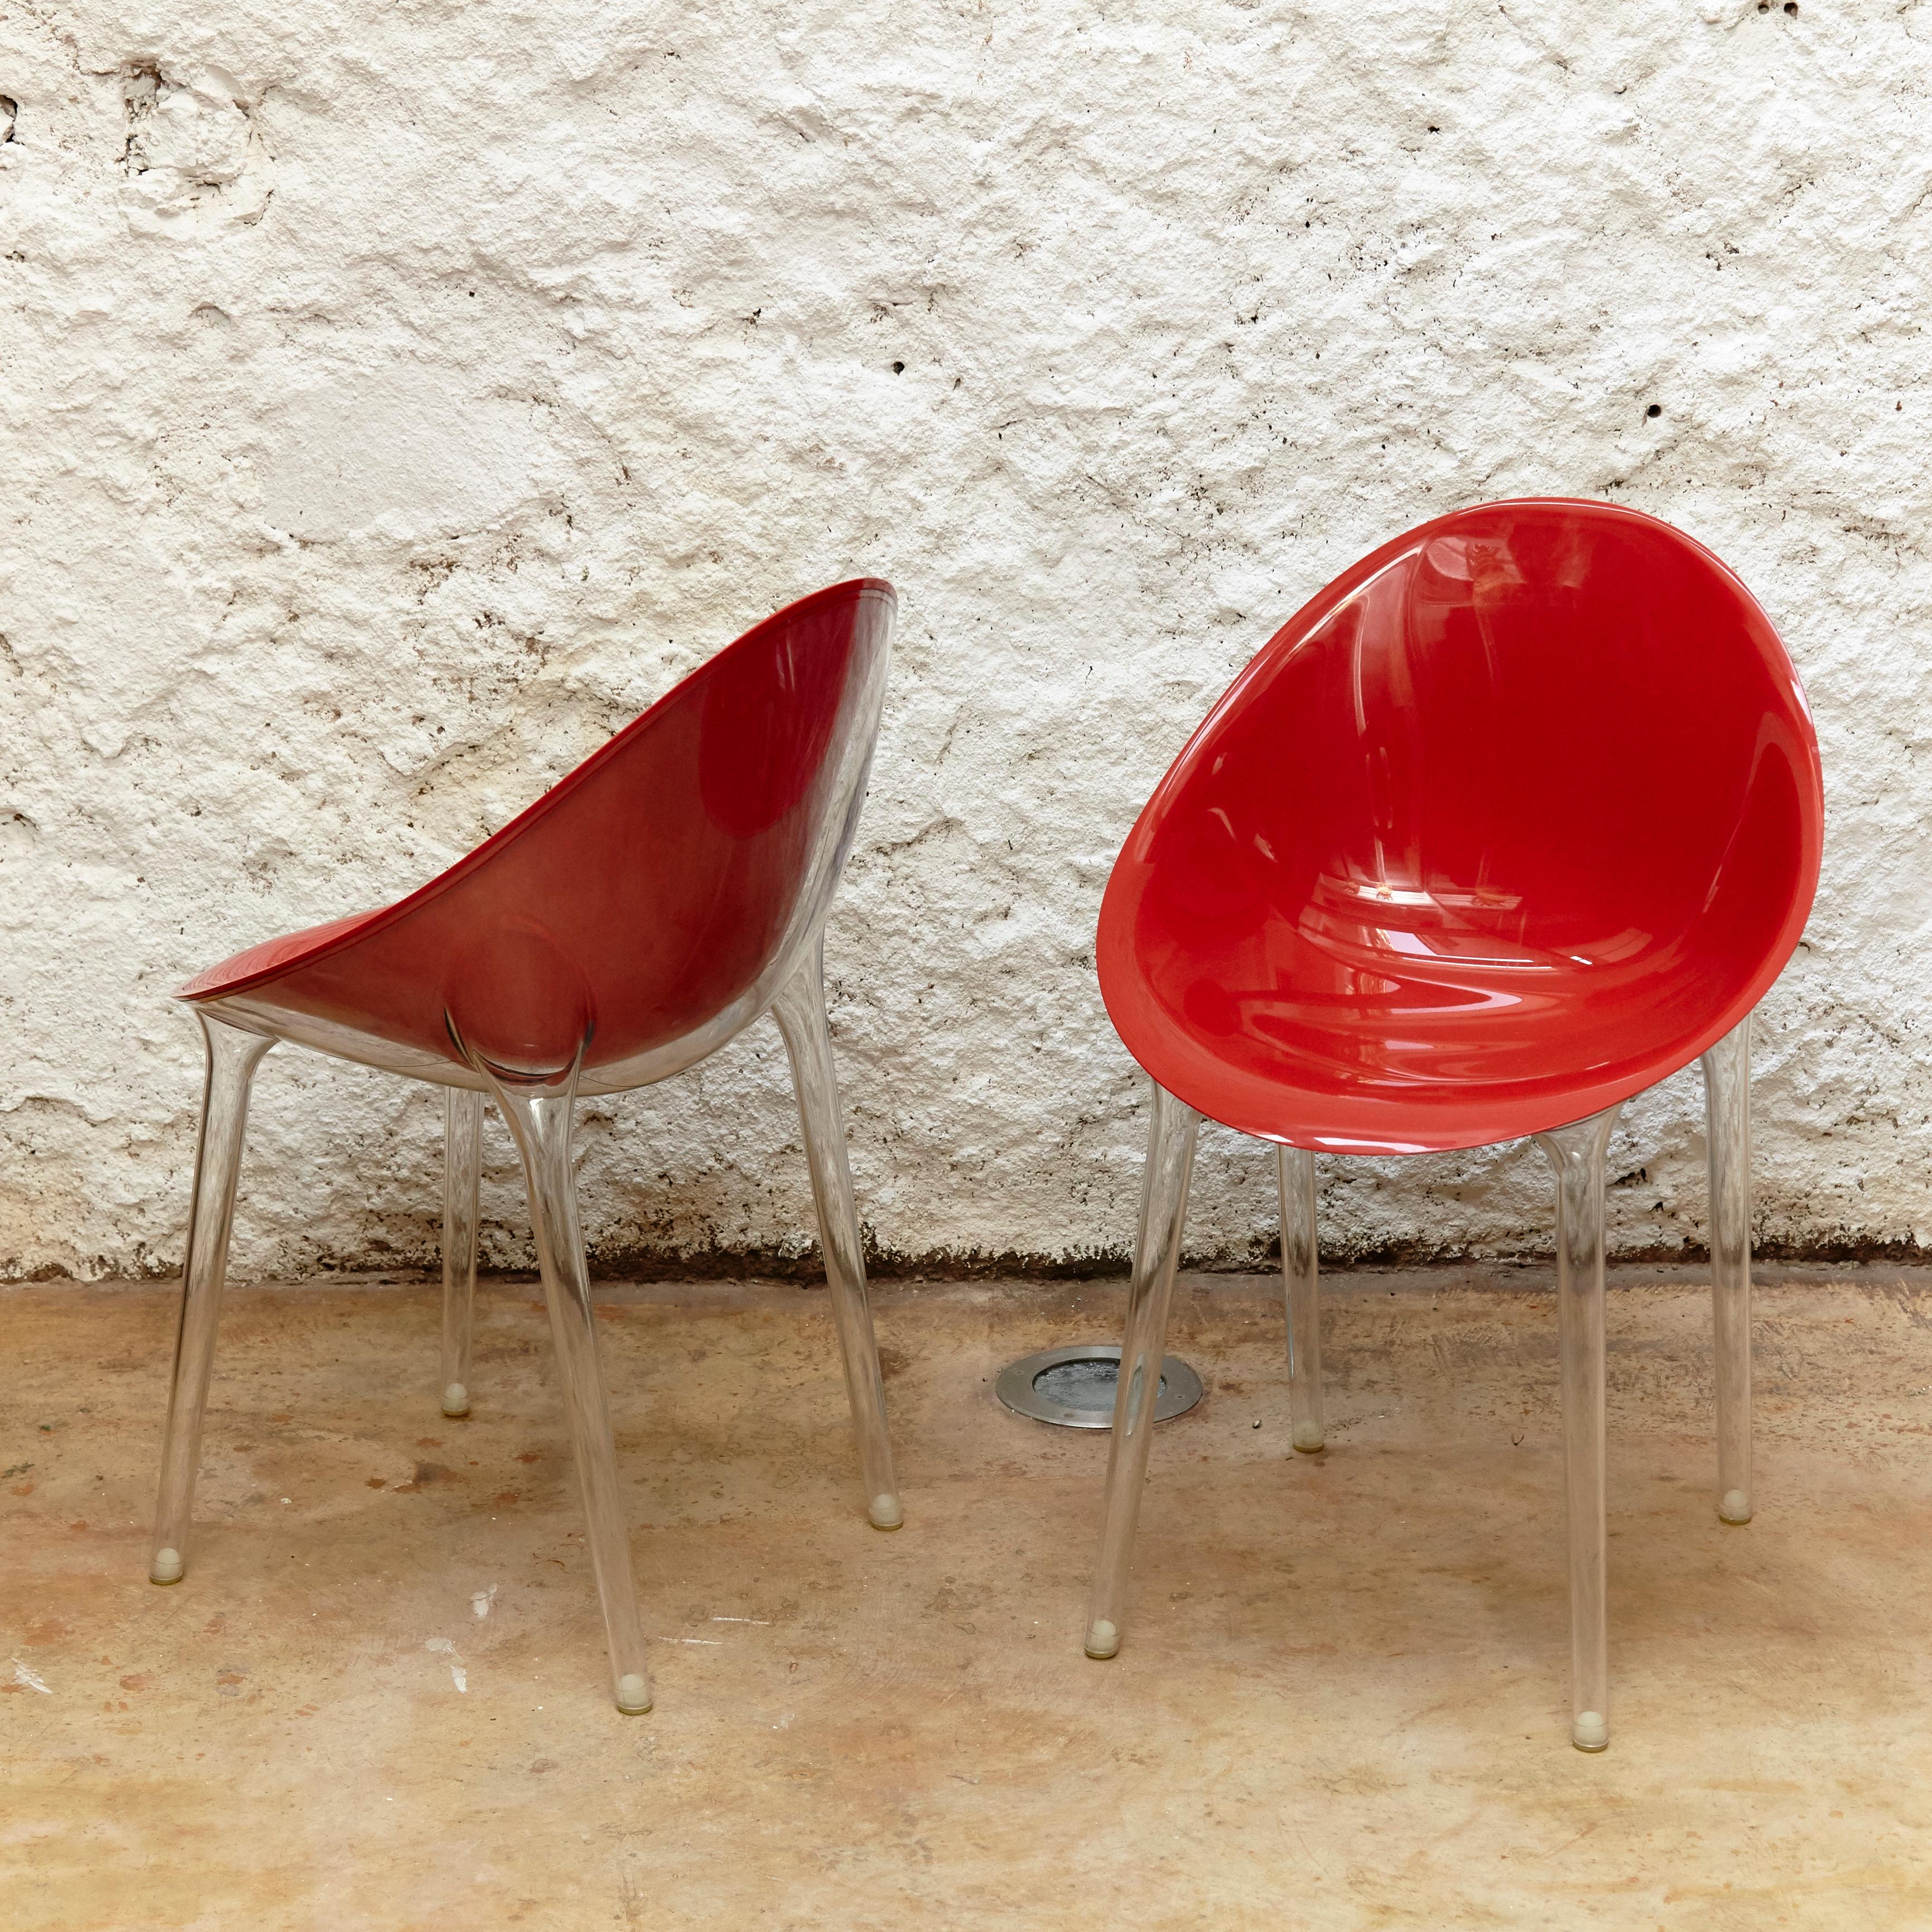 Modern Set of 4 Philippe Starck Impossible Chair Red by Kartell, circa 2008